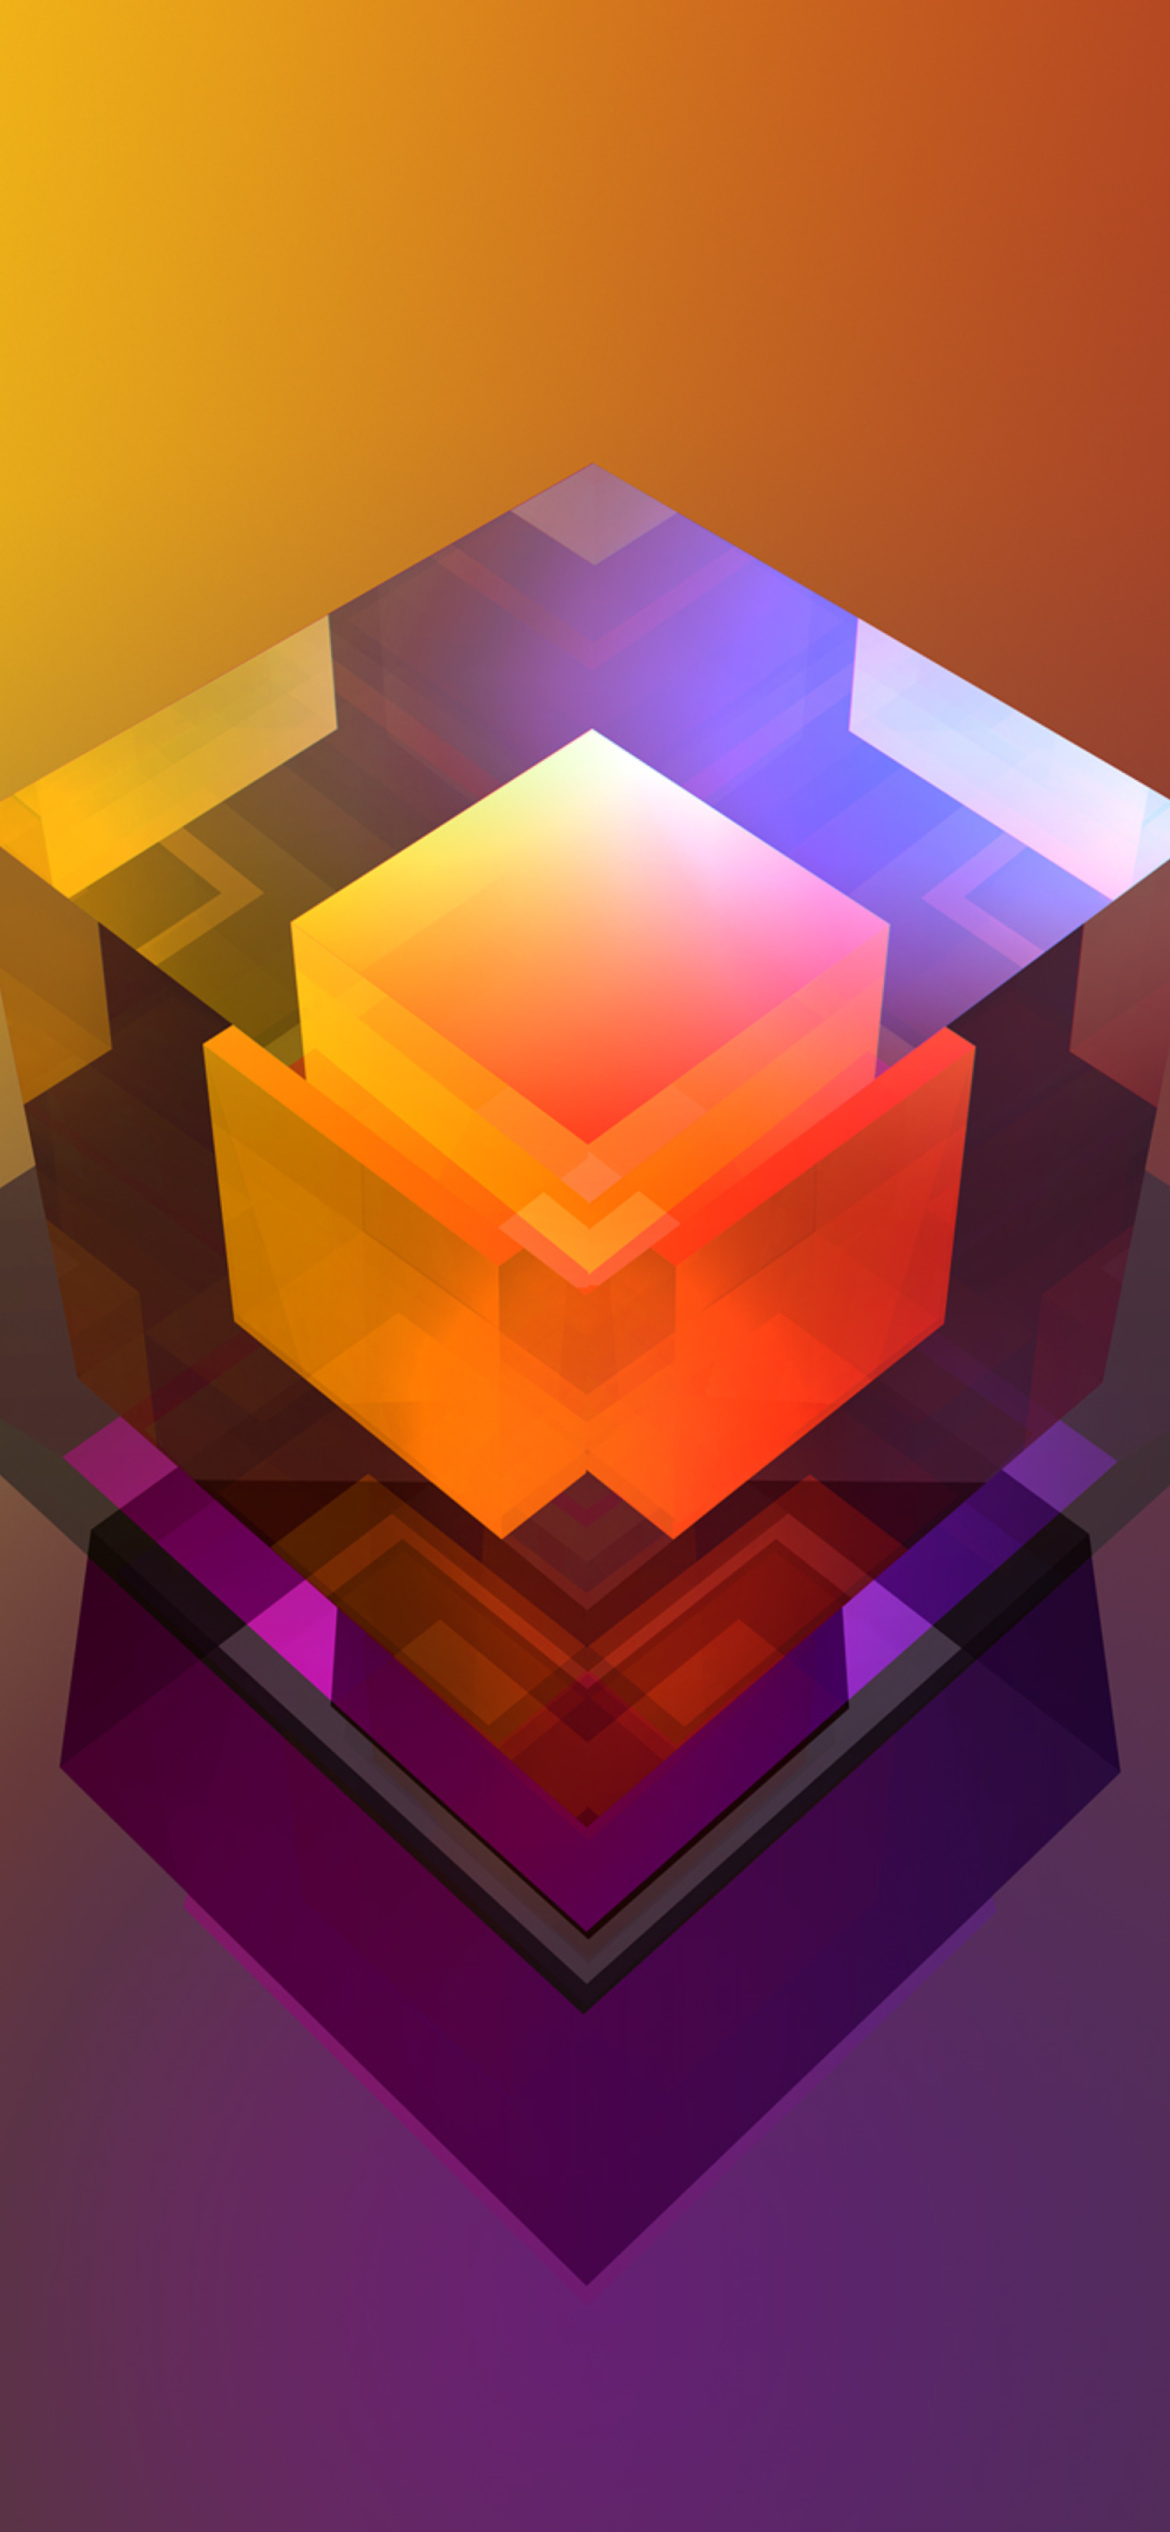 Colorful Cube wallpaper 1170x2532